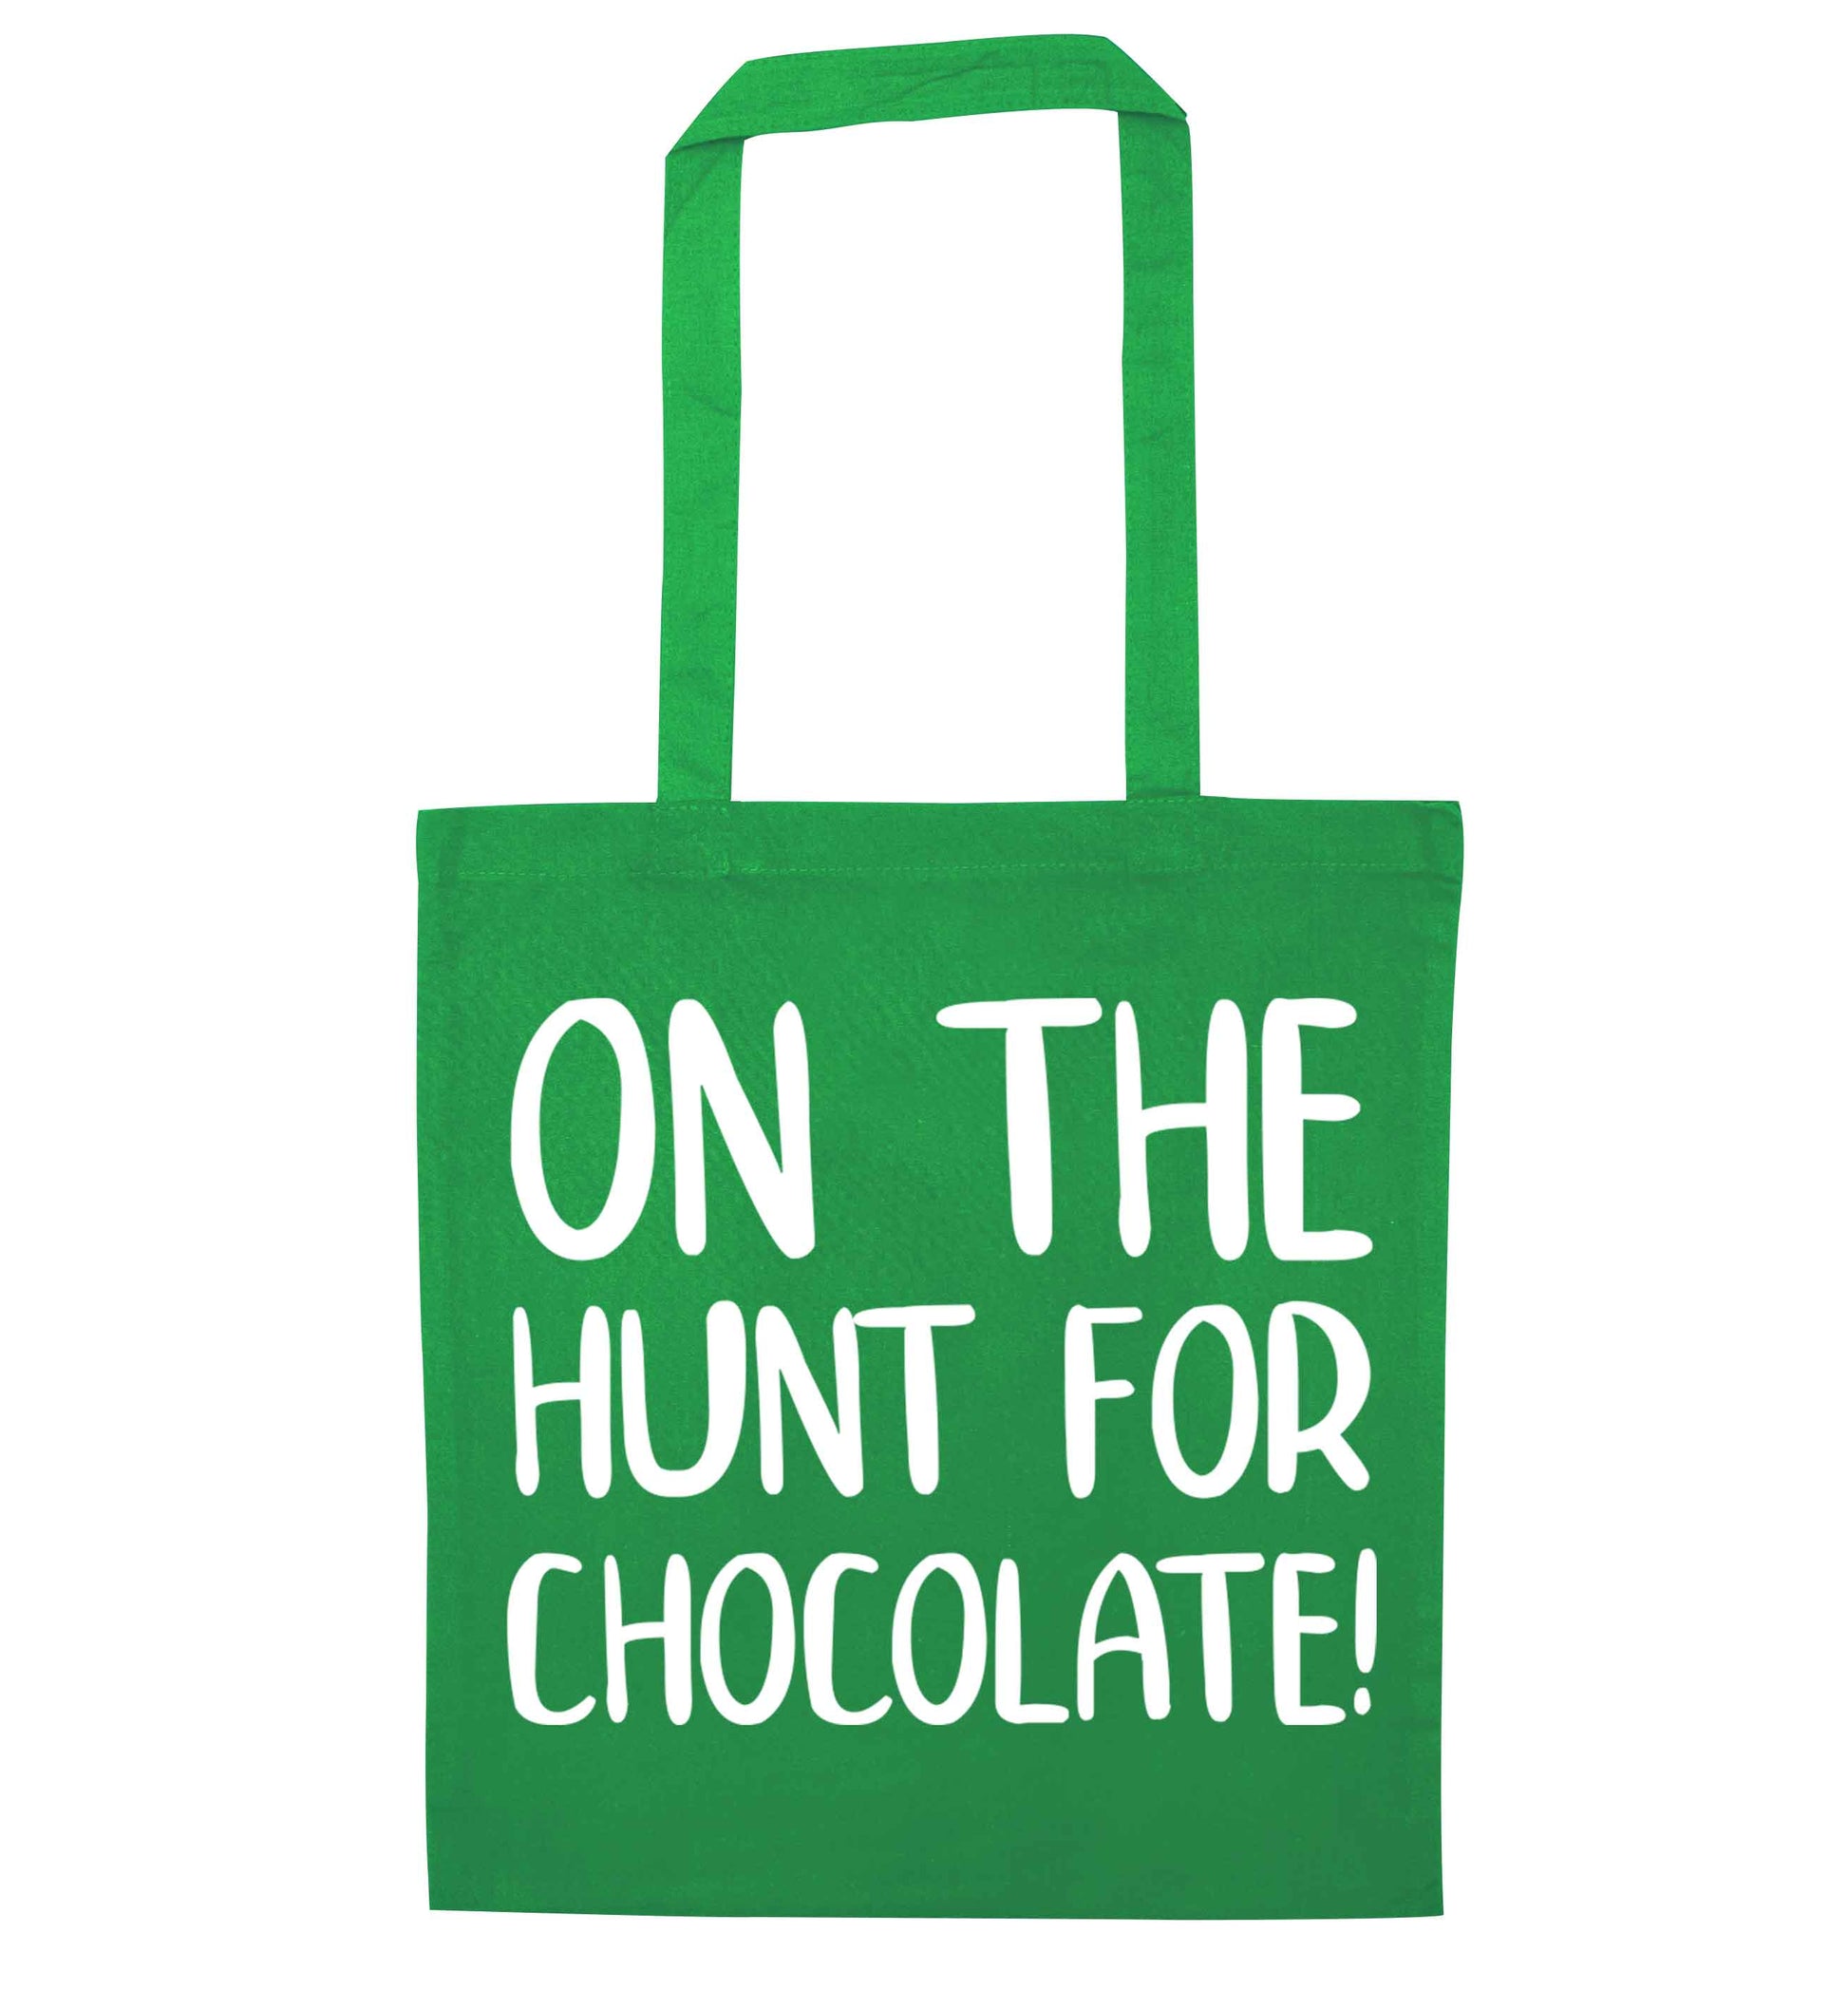 On the hunt for chocolate! green tote bag